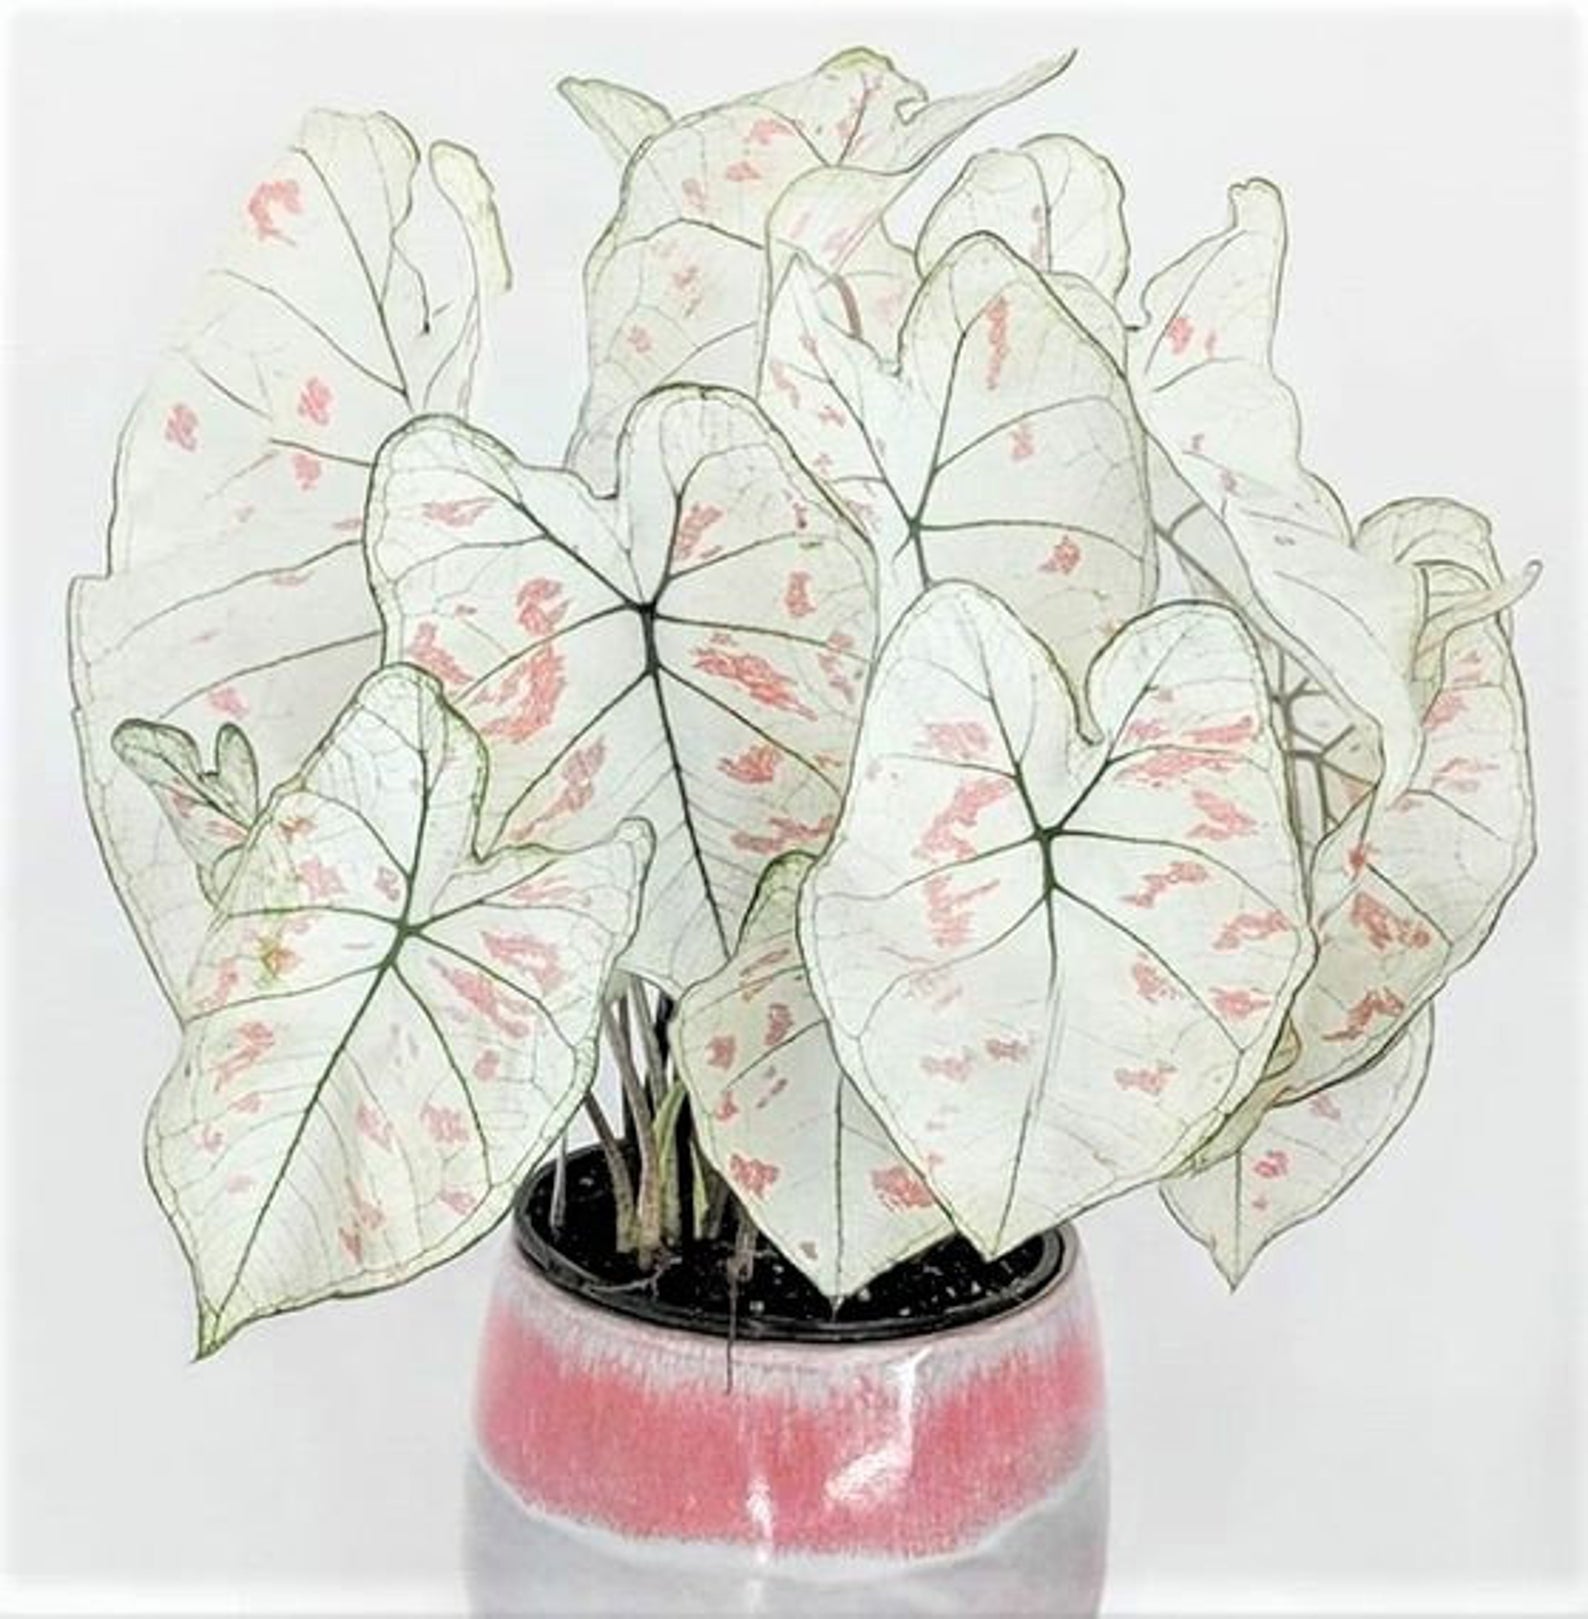 If you're looking for rare and beautiful houseplants, check out the My Plant Obsession Etsy shop. 